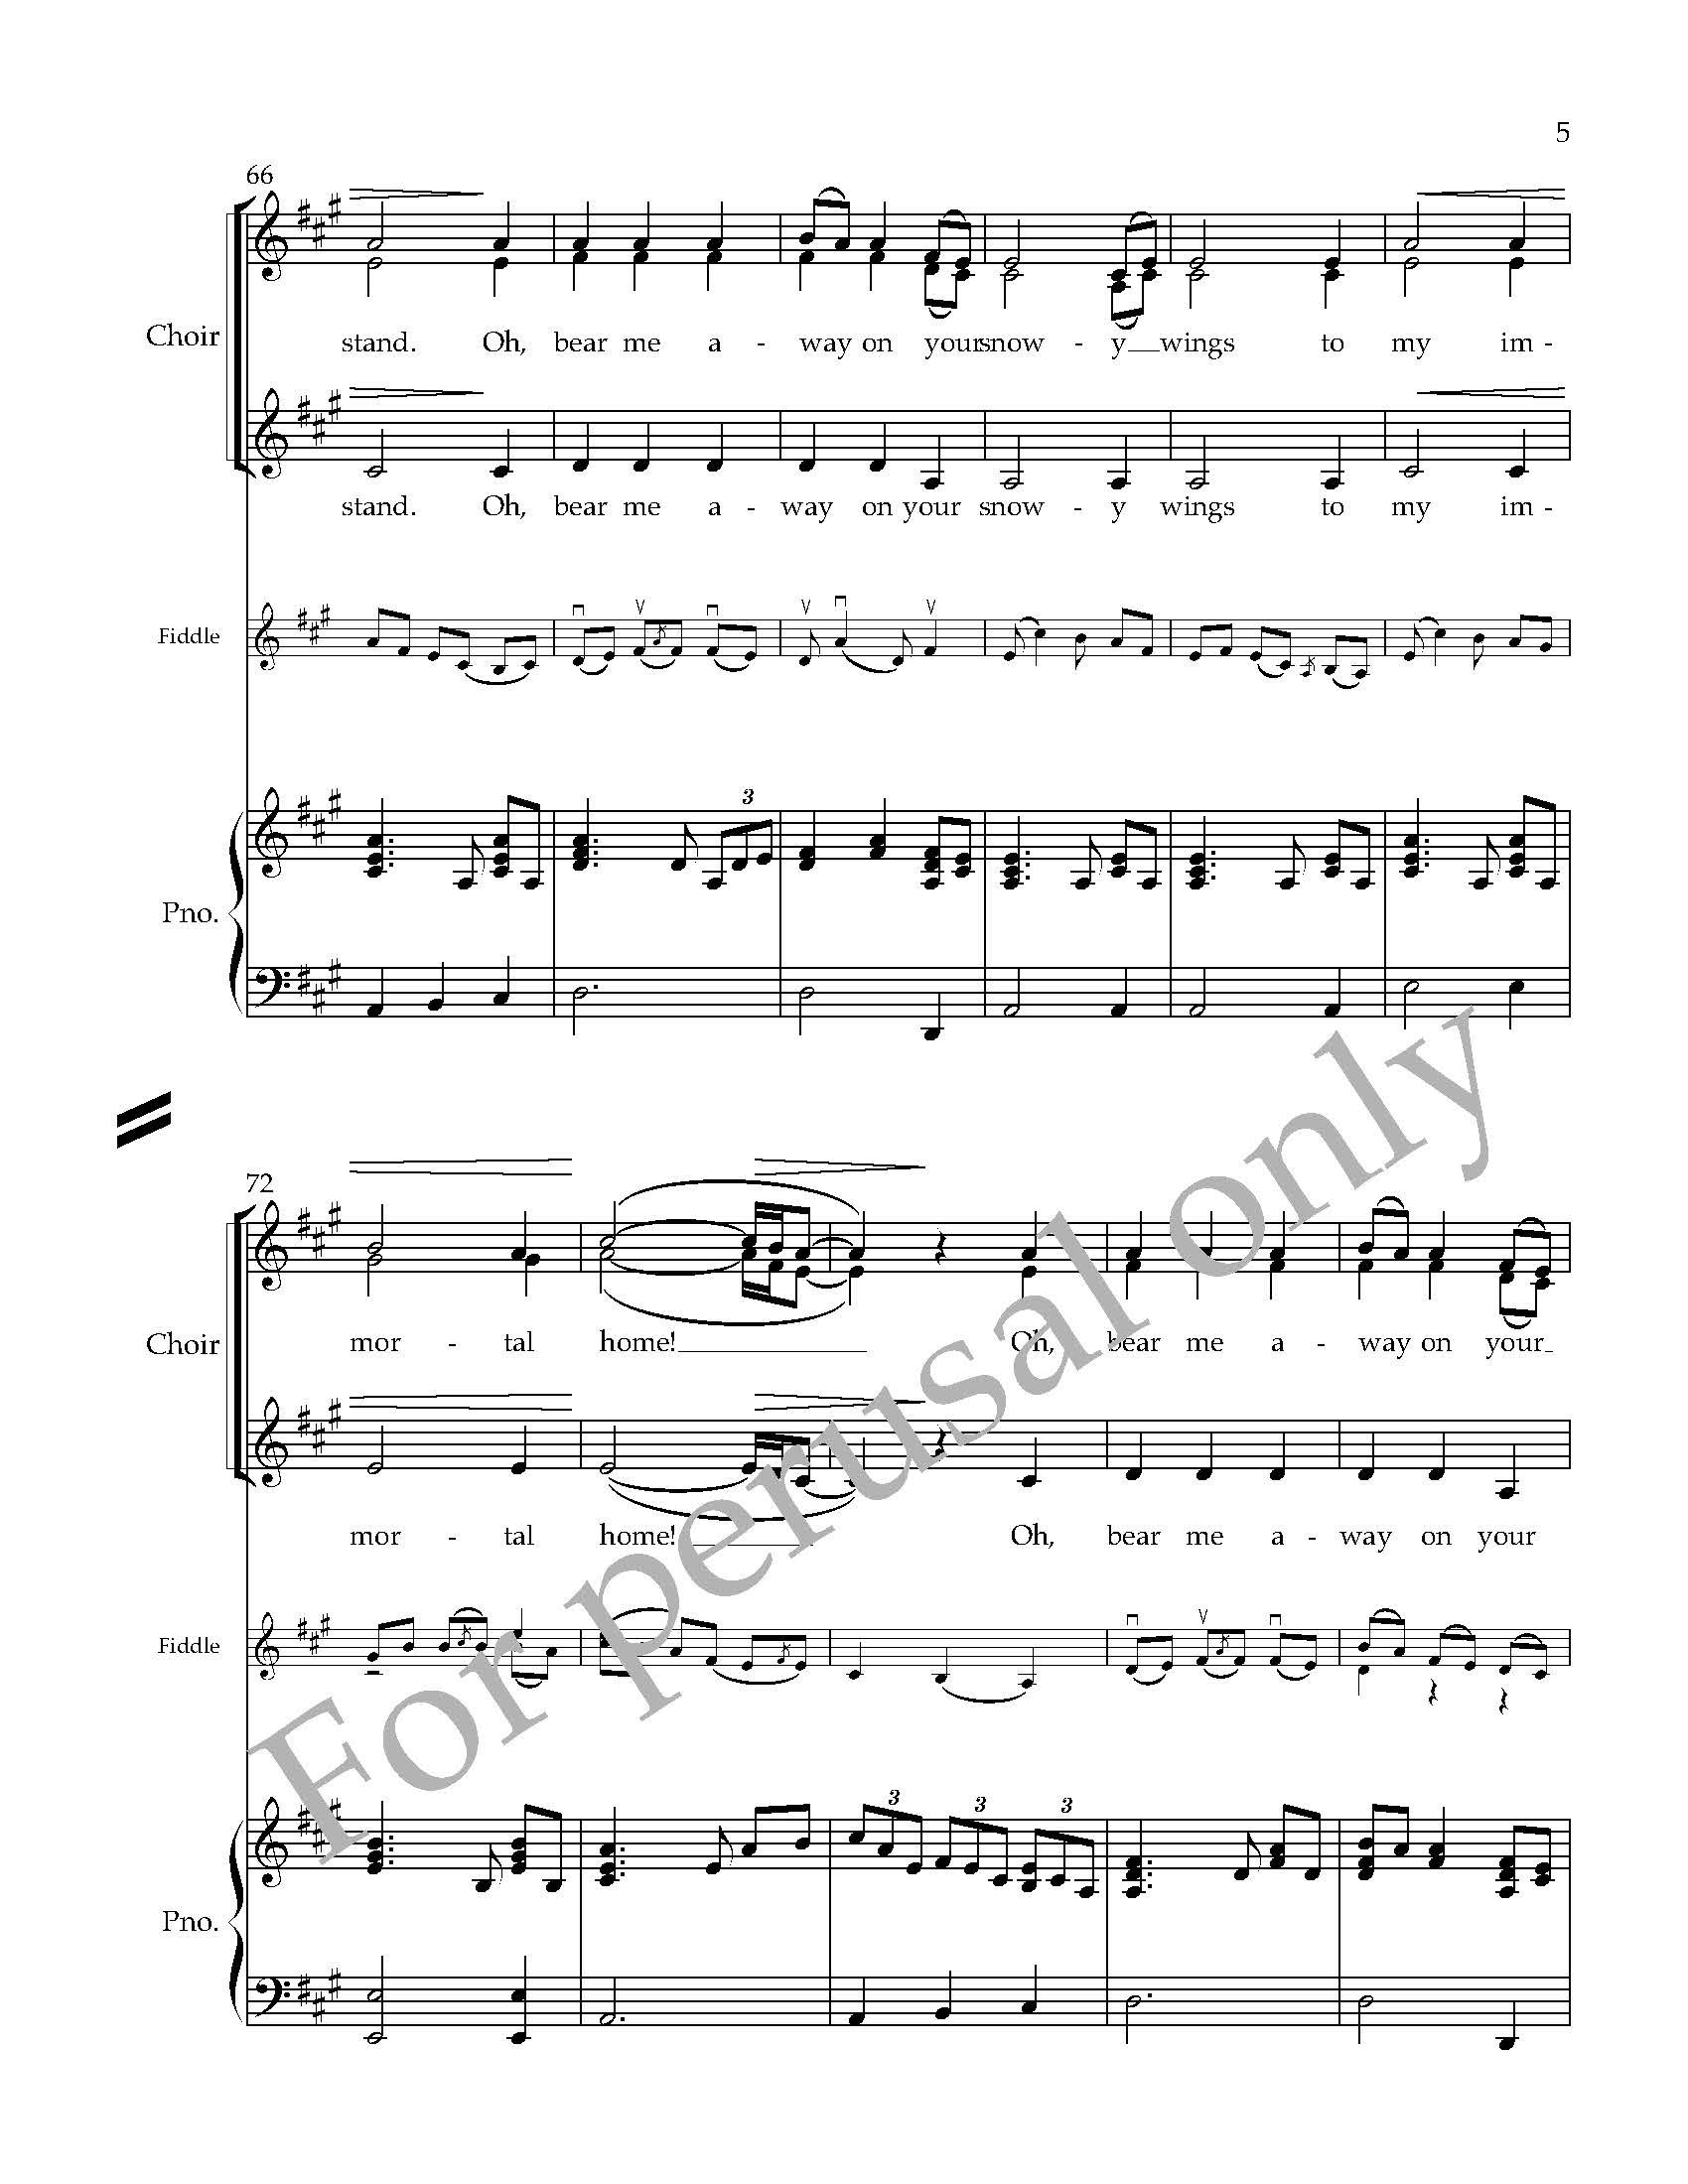 VOCAL SCORE  preview- Angel Band for three-part choir, piano, fiddle, guitar, string bass - arr. Ryan James Brandau_Page_07.jpg